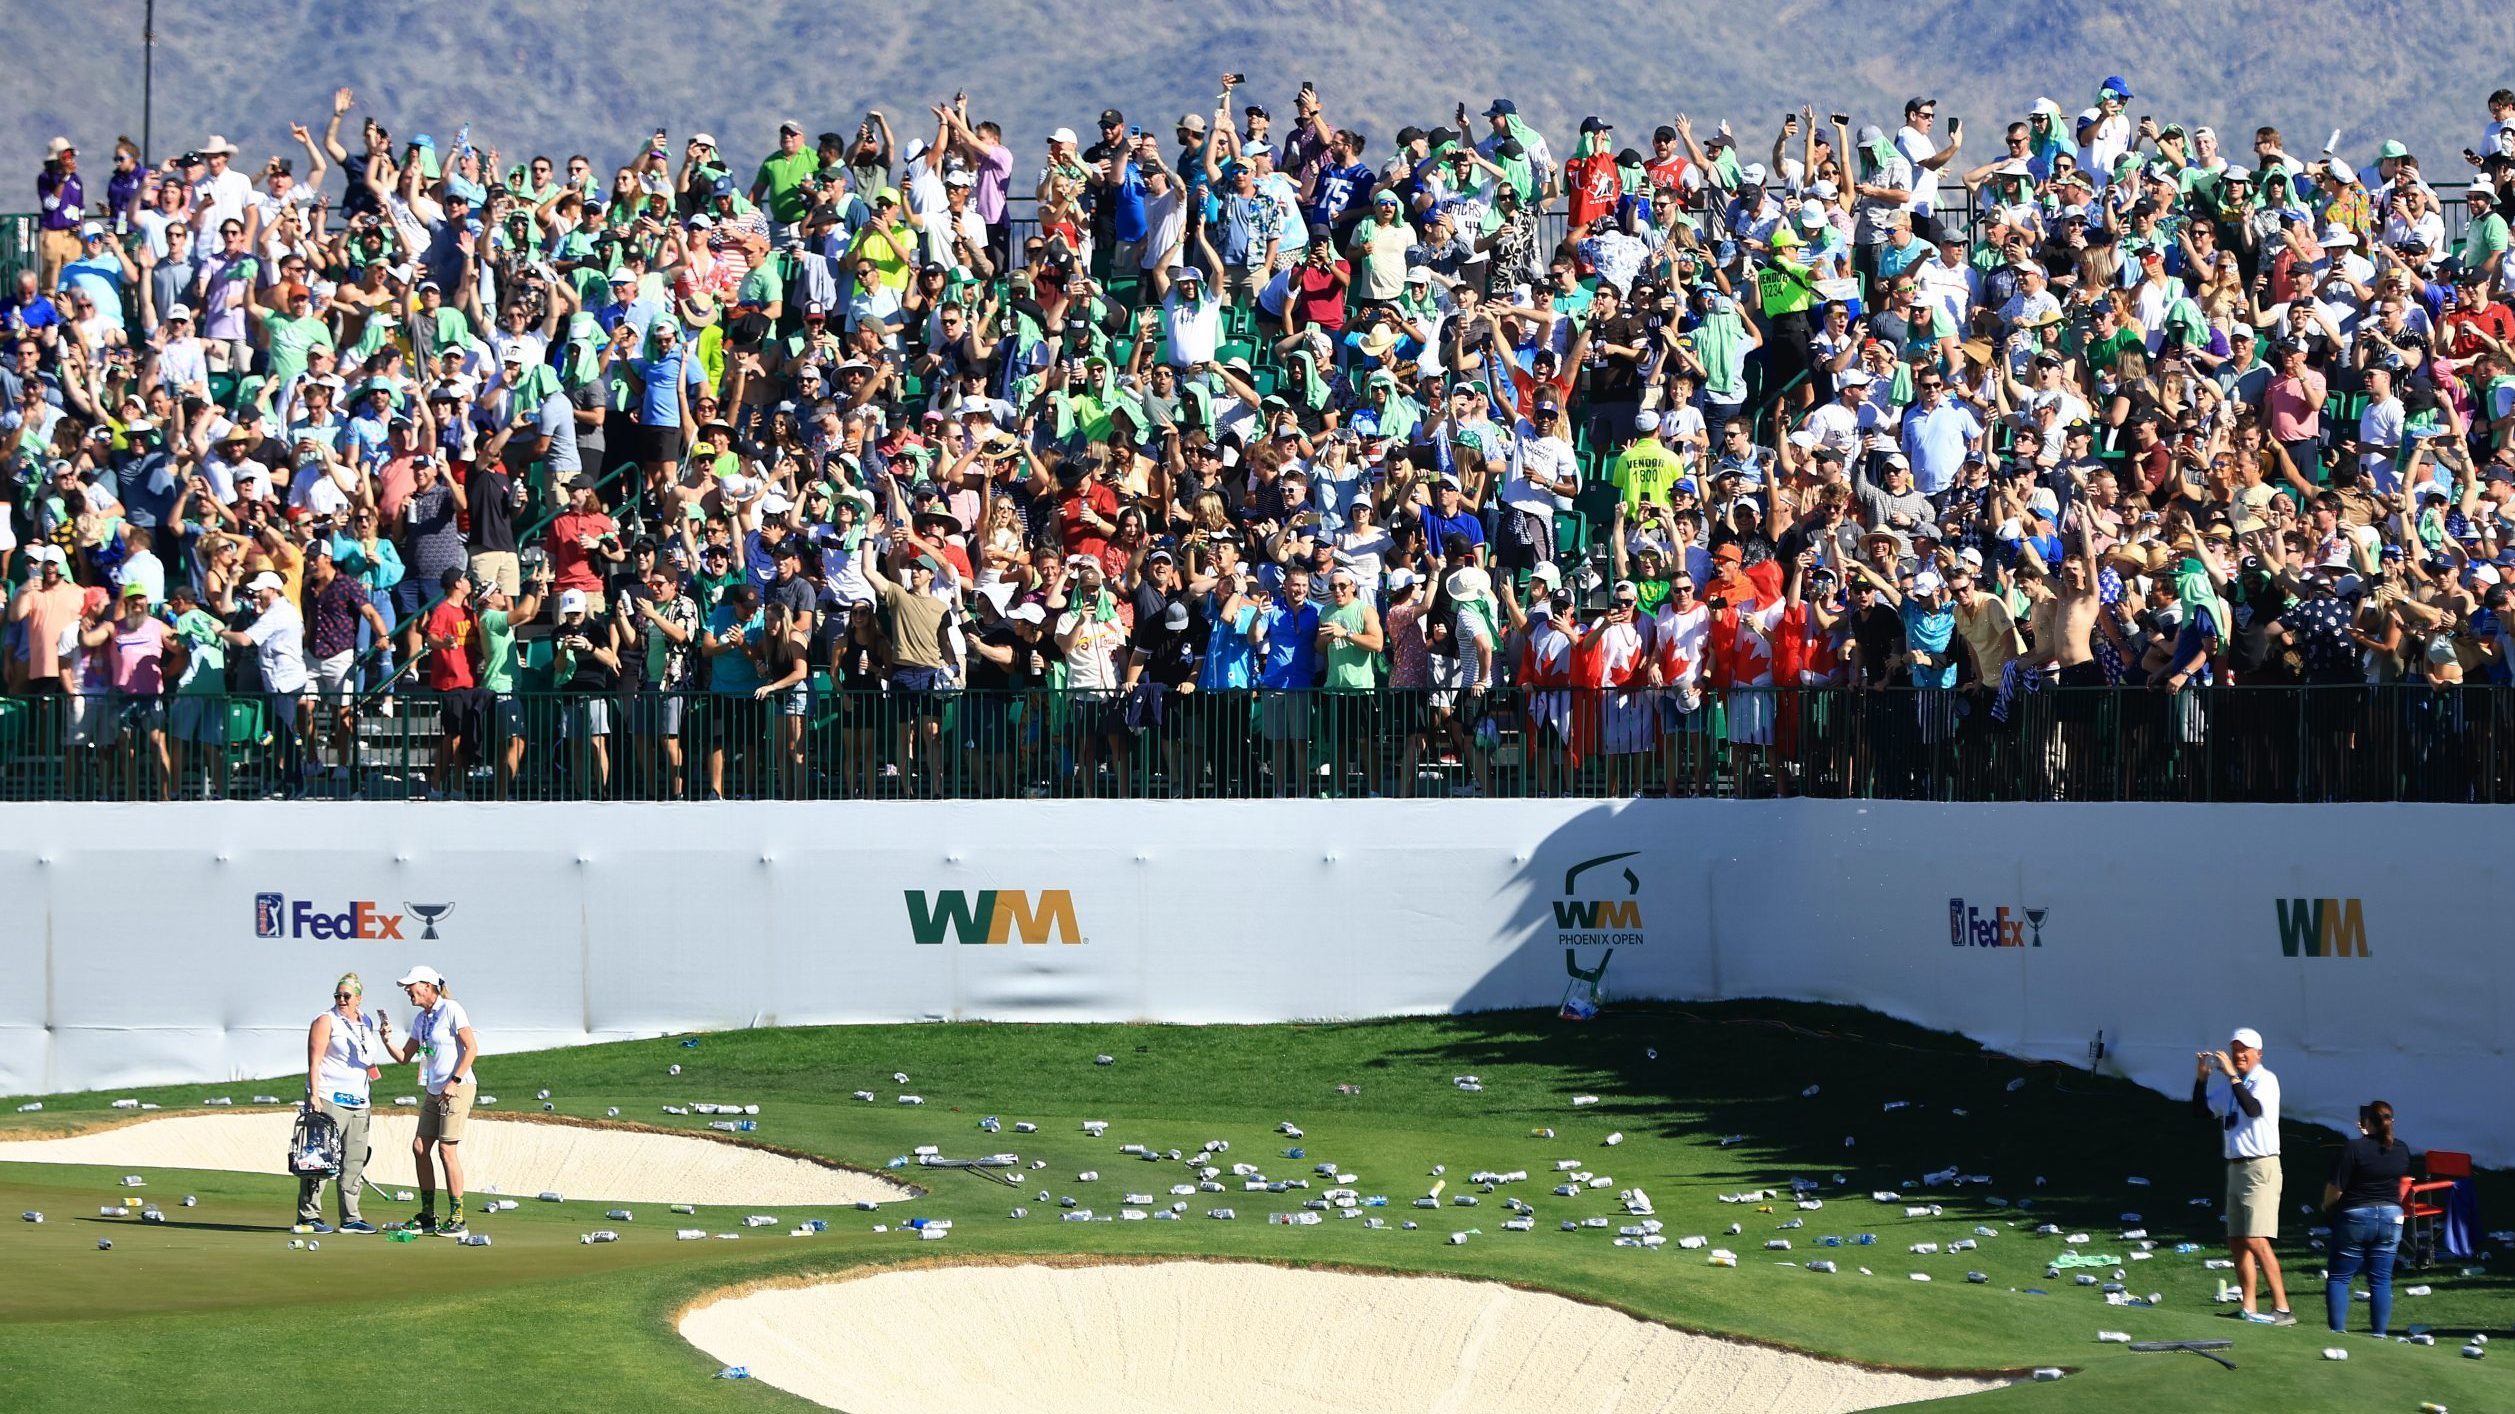 SCOTTSDALE, ARIZONA - FEBRUARY 12: Bottles litter the 16th hole after a hole-in-one by Sam Ryder of...